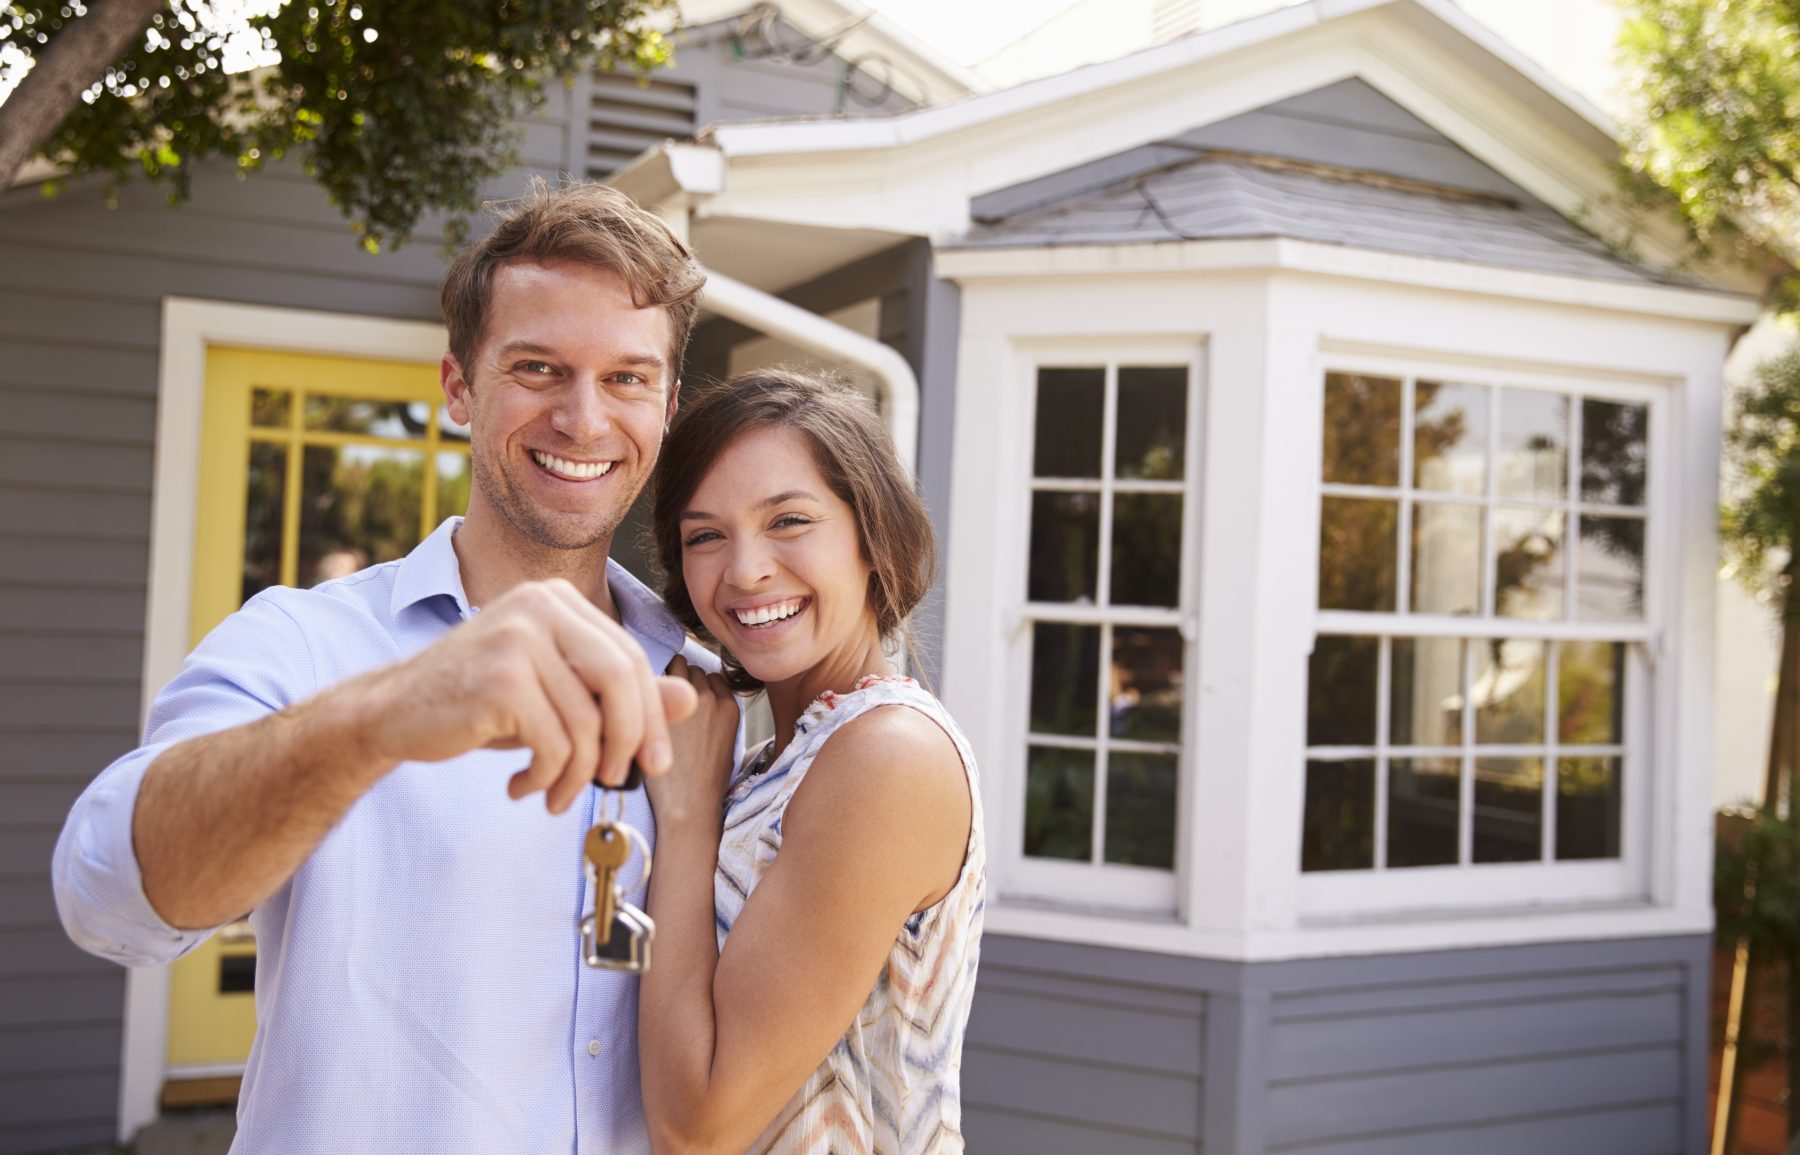 The Most Accurate Home Price Tool: What Buyers and Sellers Need to Know About the MLS